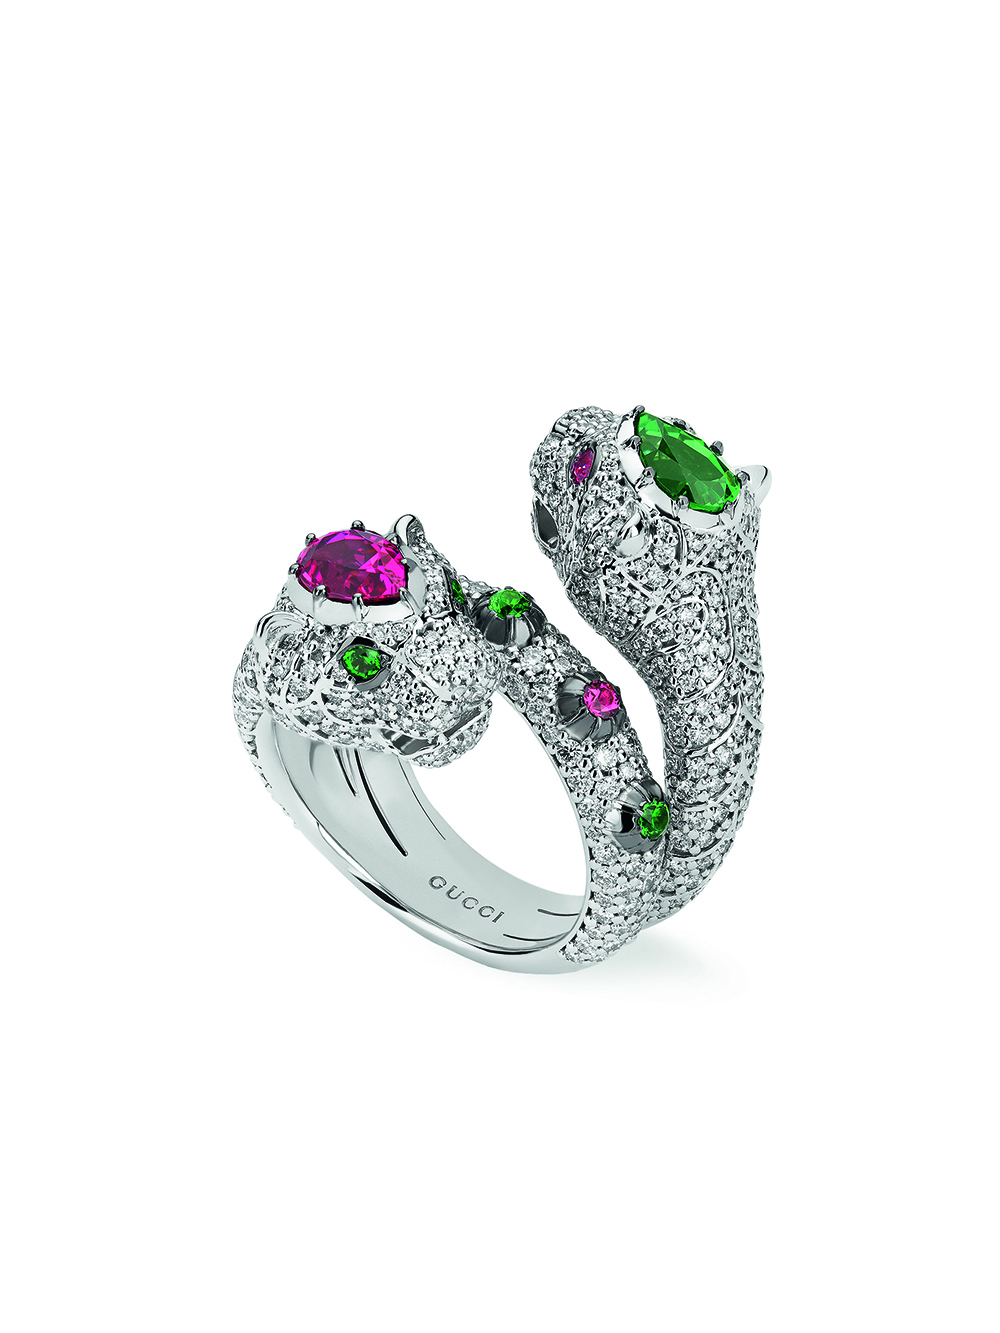 Gucci Debuts Its First-Ever High Jewellery Collection at Place Vendôme ...